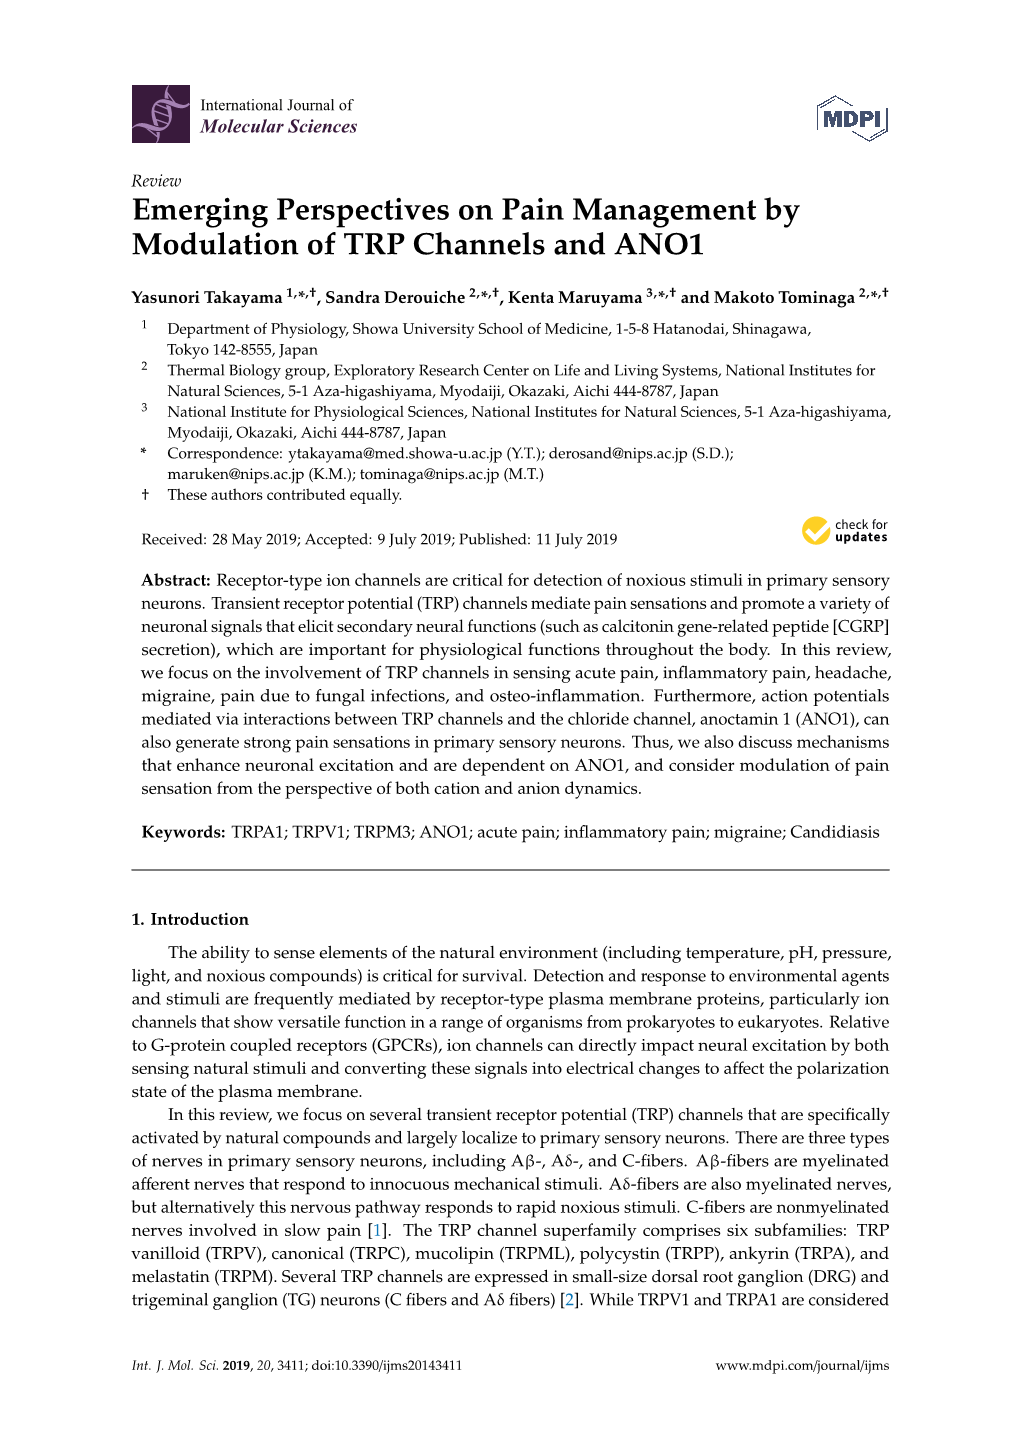 Emerging Perspectives on Pain Management by Modulation of TRP Channels and ANO1